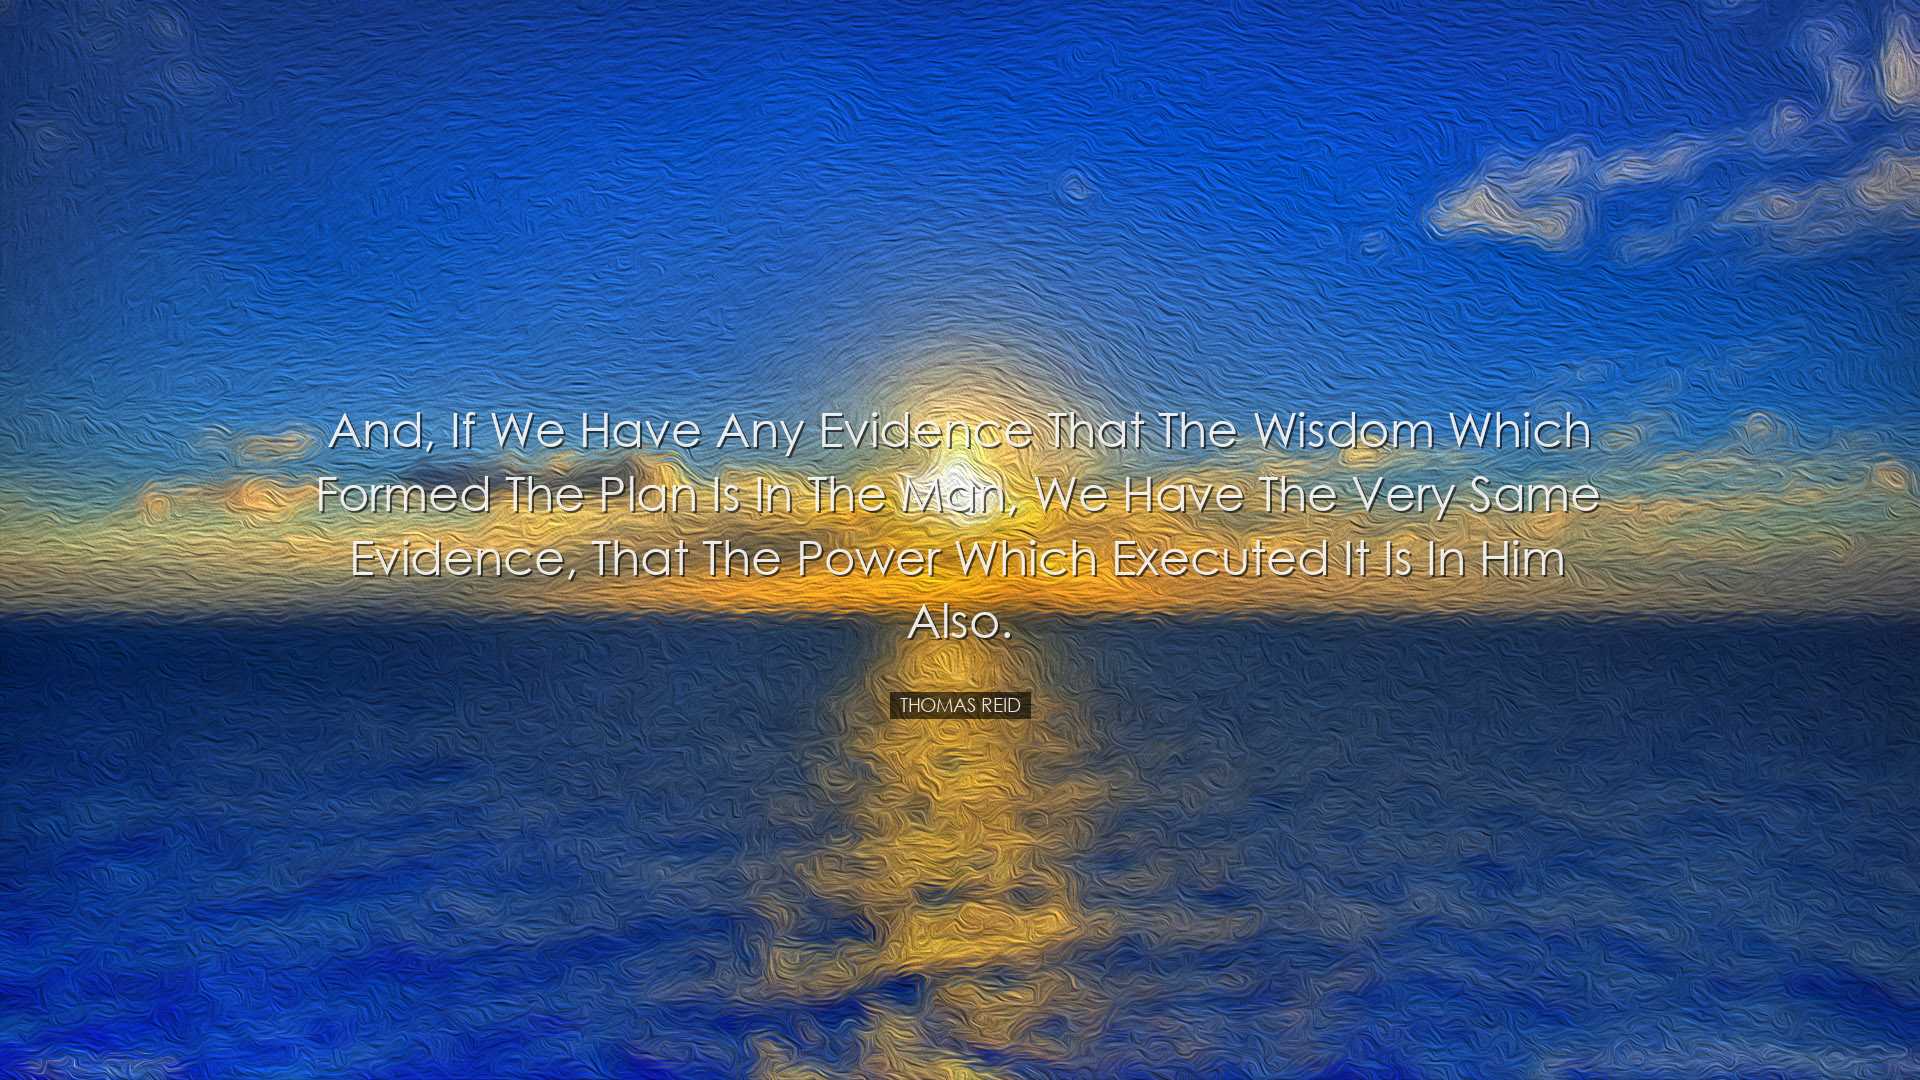 And, if we have any evidence that the wisdom which formed the plan